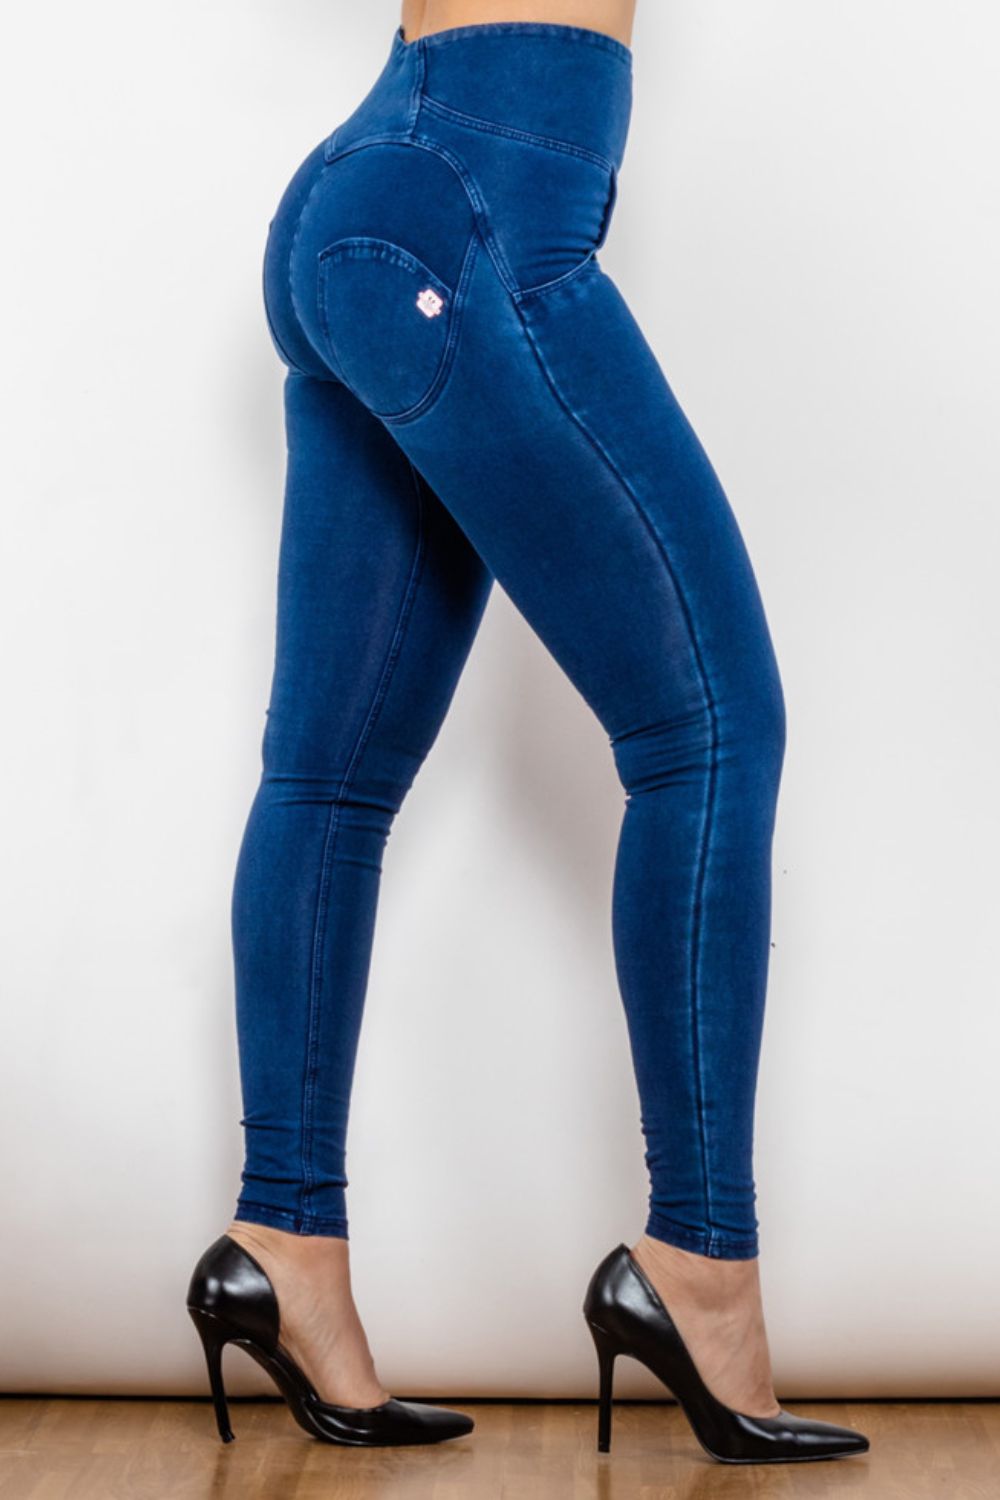 High Waist Zip Up Skinny Long Jeans - Jeans - FITGGINS